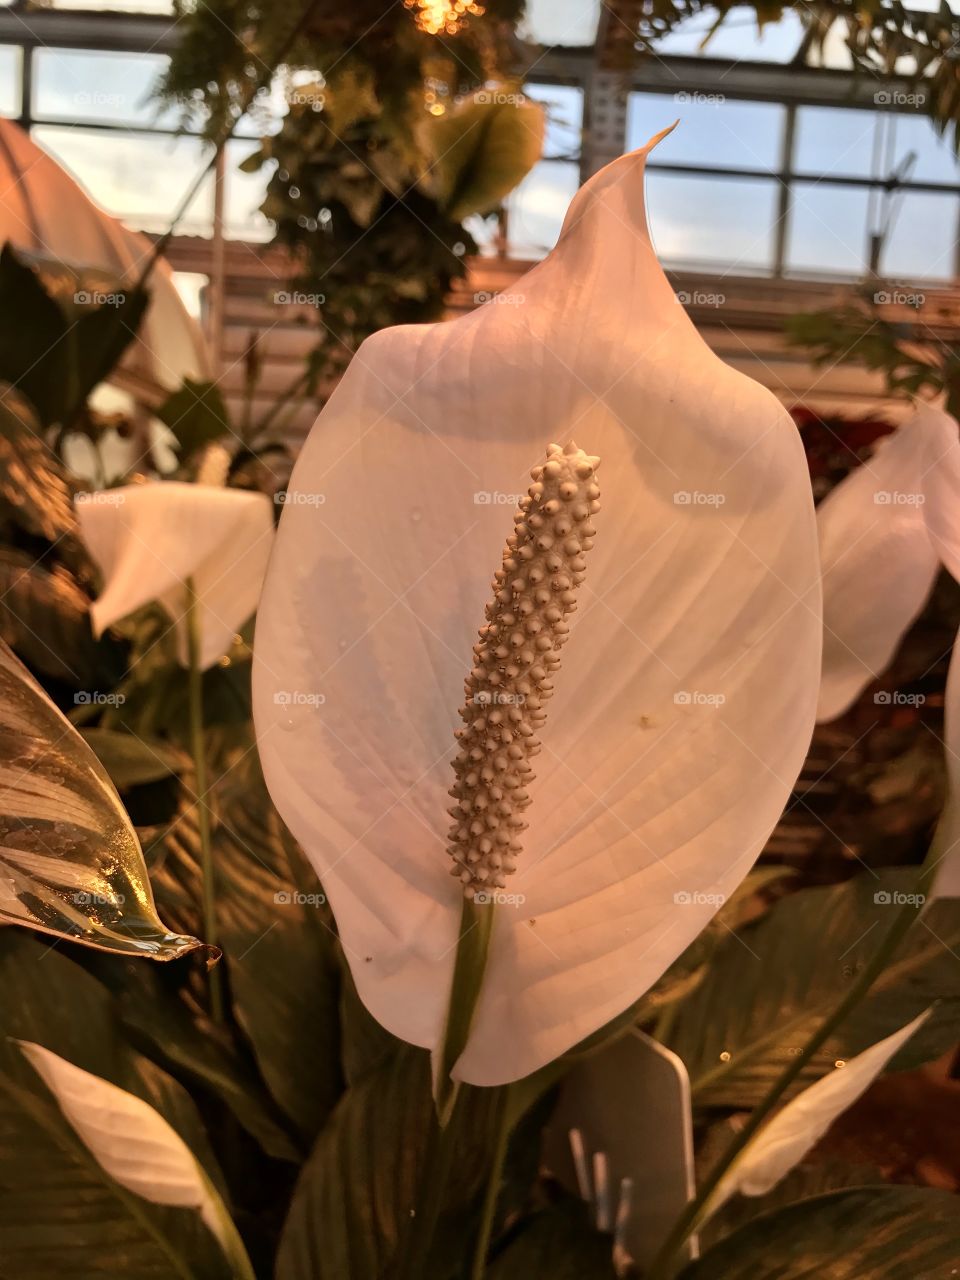 Up close image of a beautiful springtime white lily in full bloom inside a rooftop greenhouse